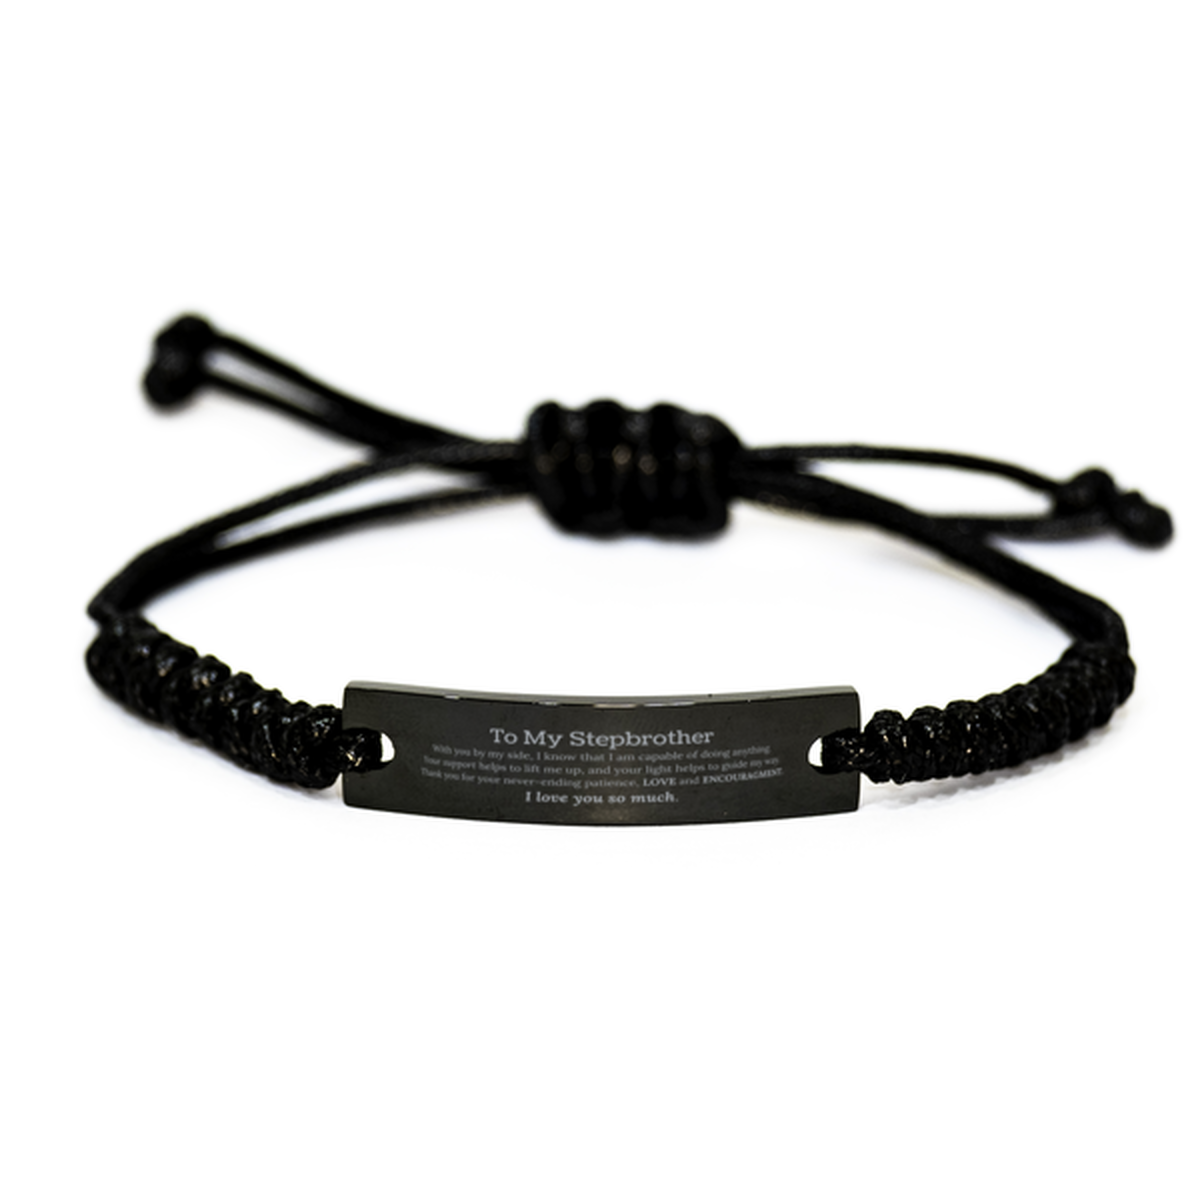 Appreciation Stepbrother Black Rope Bracelet Gifts, To My Stepbrother Birthday Christmas Wedding Keepsake Gifts for Stepbrother With you by my side, I know that I am capable of doing anything. I love you so much